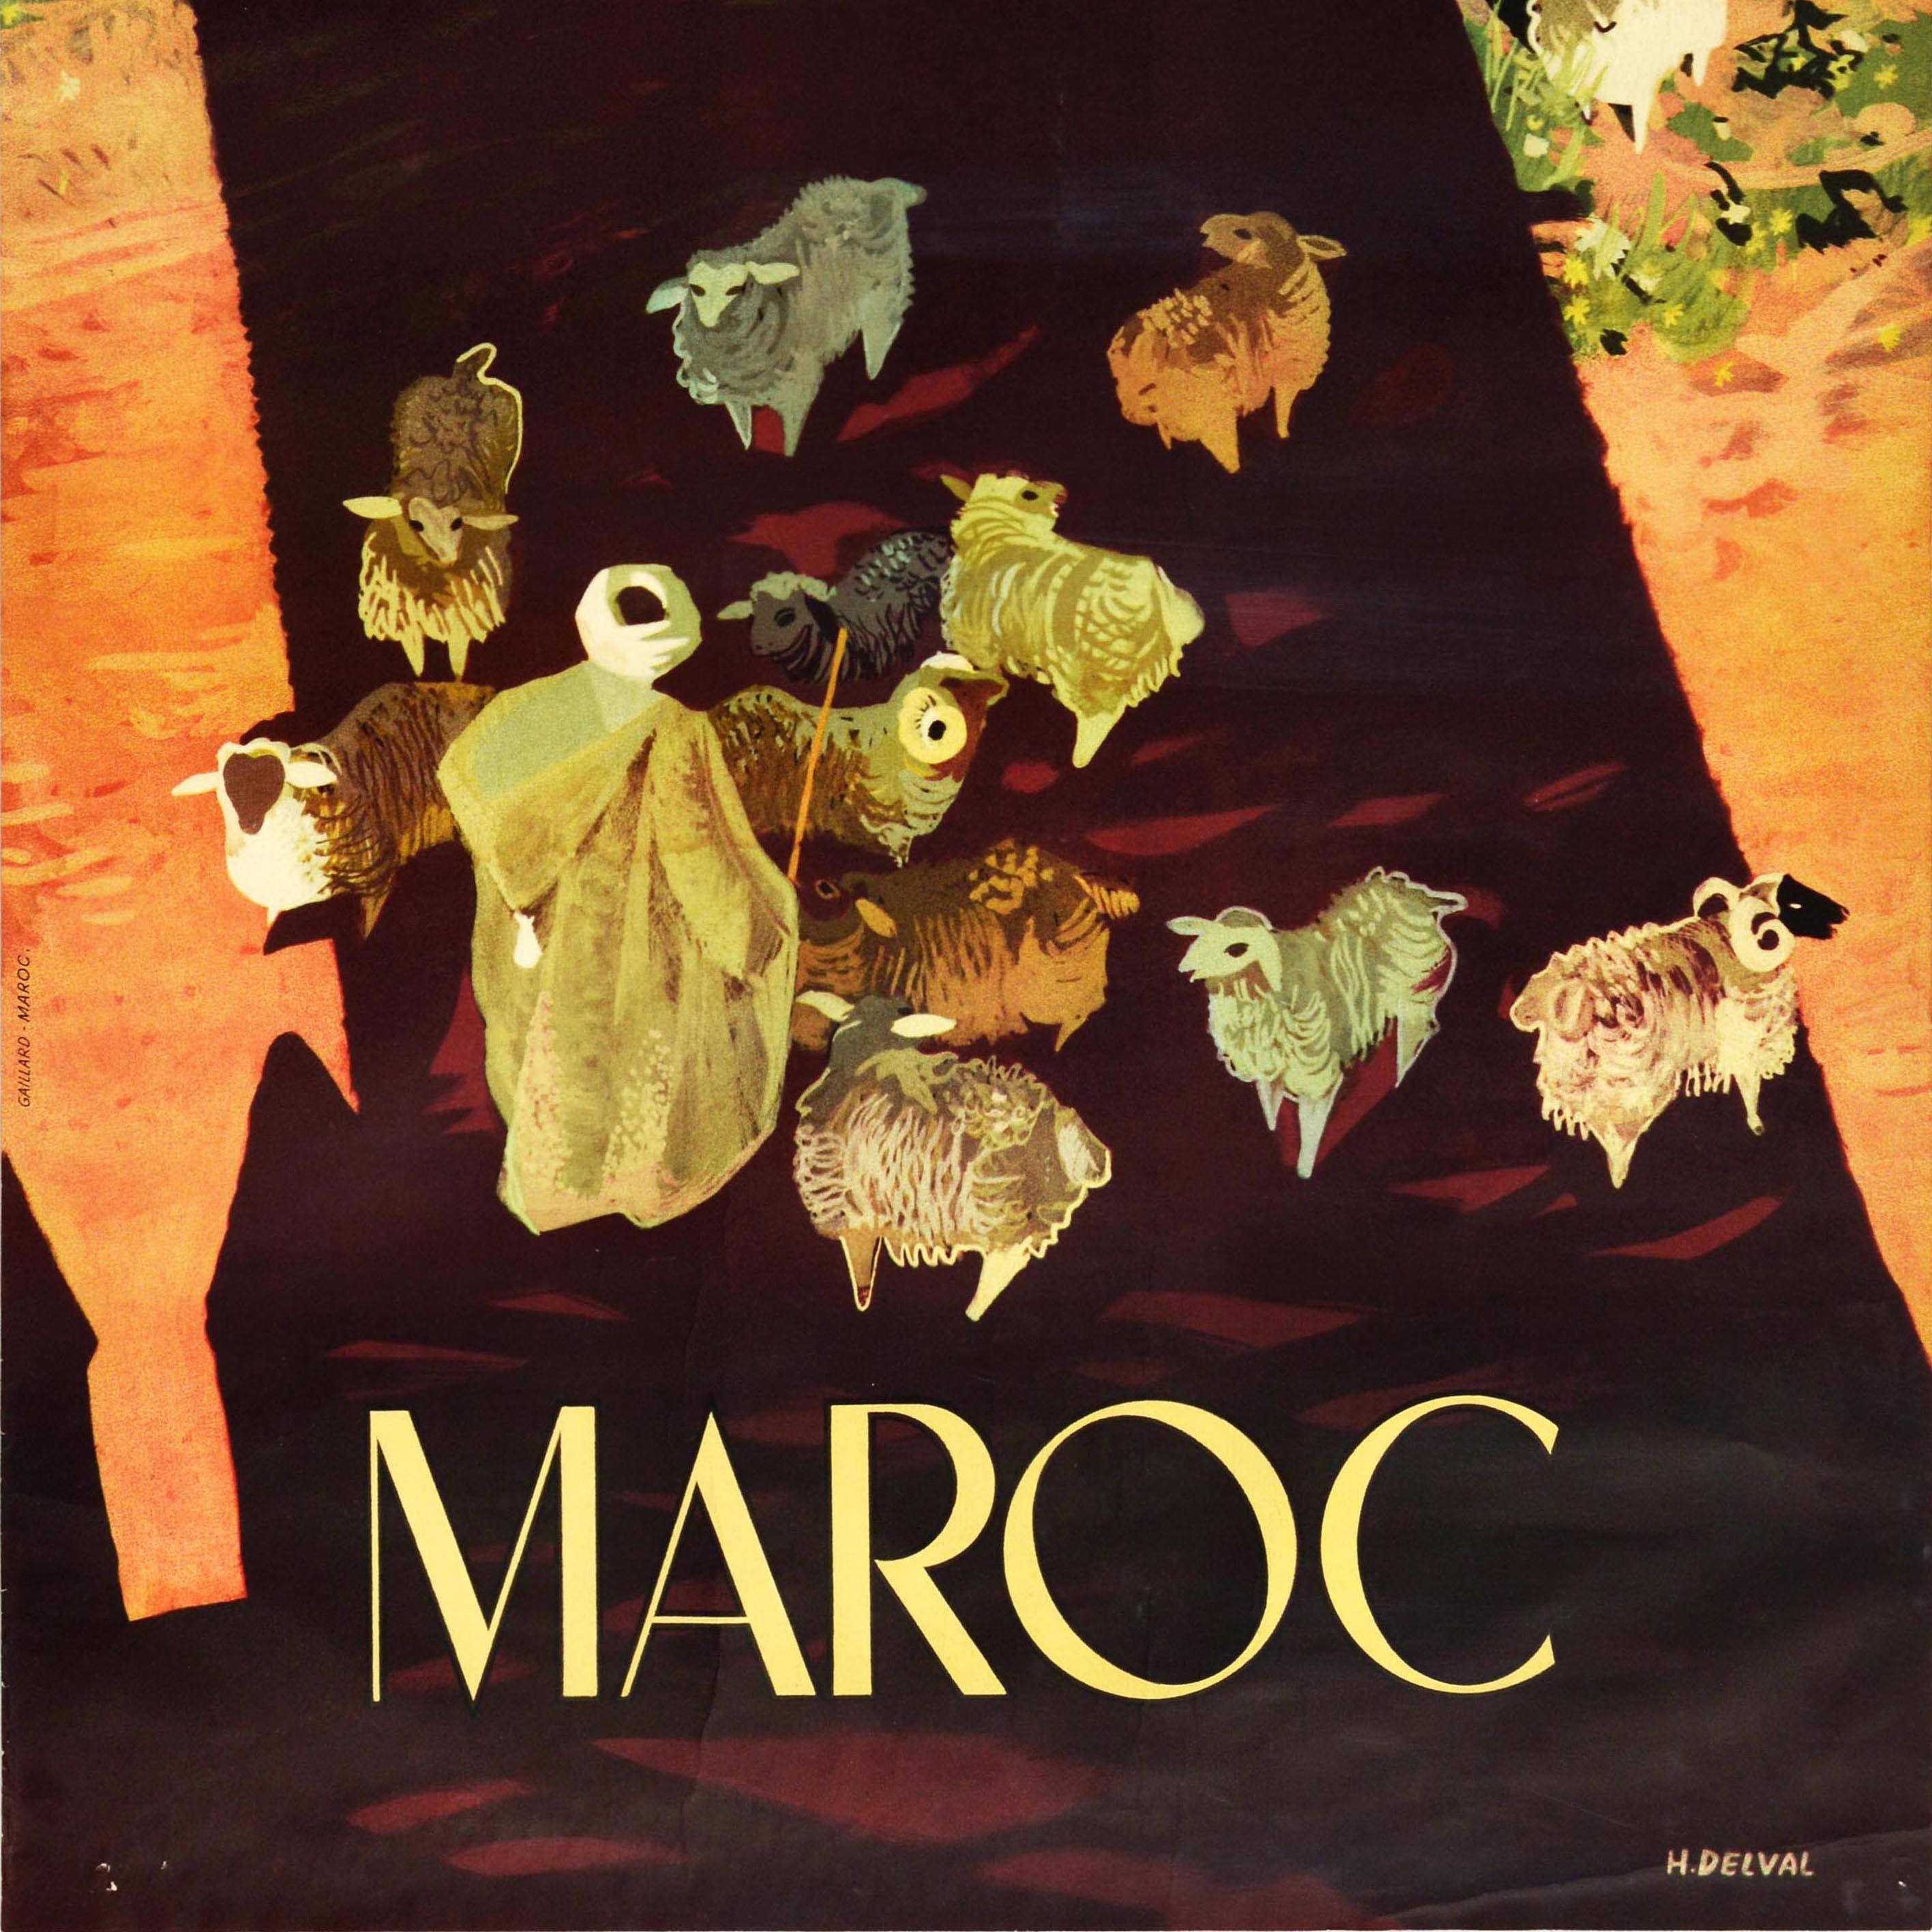 Original vintage travel poster for Morocco issued by the Moroccan Tourist Bureau Rabat featuring a great design of a shepherd with his flock of sheep next to grass on a lane by a small domed building, looking down from a tall building casting a